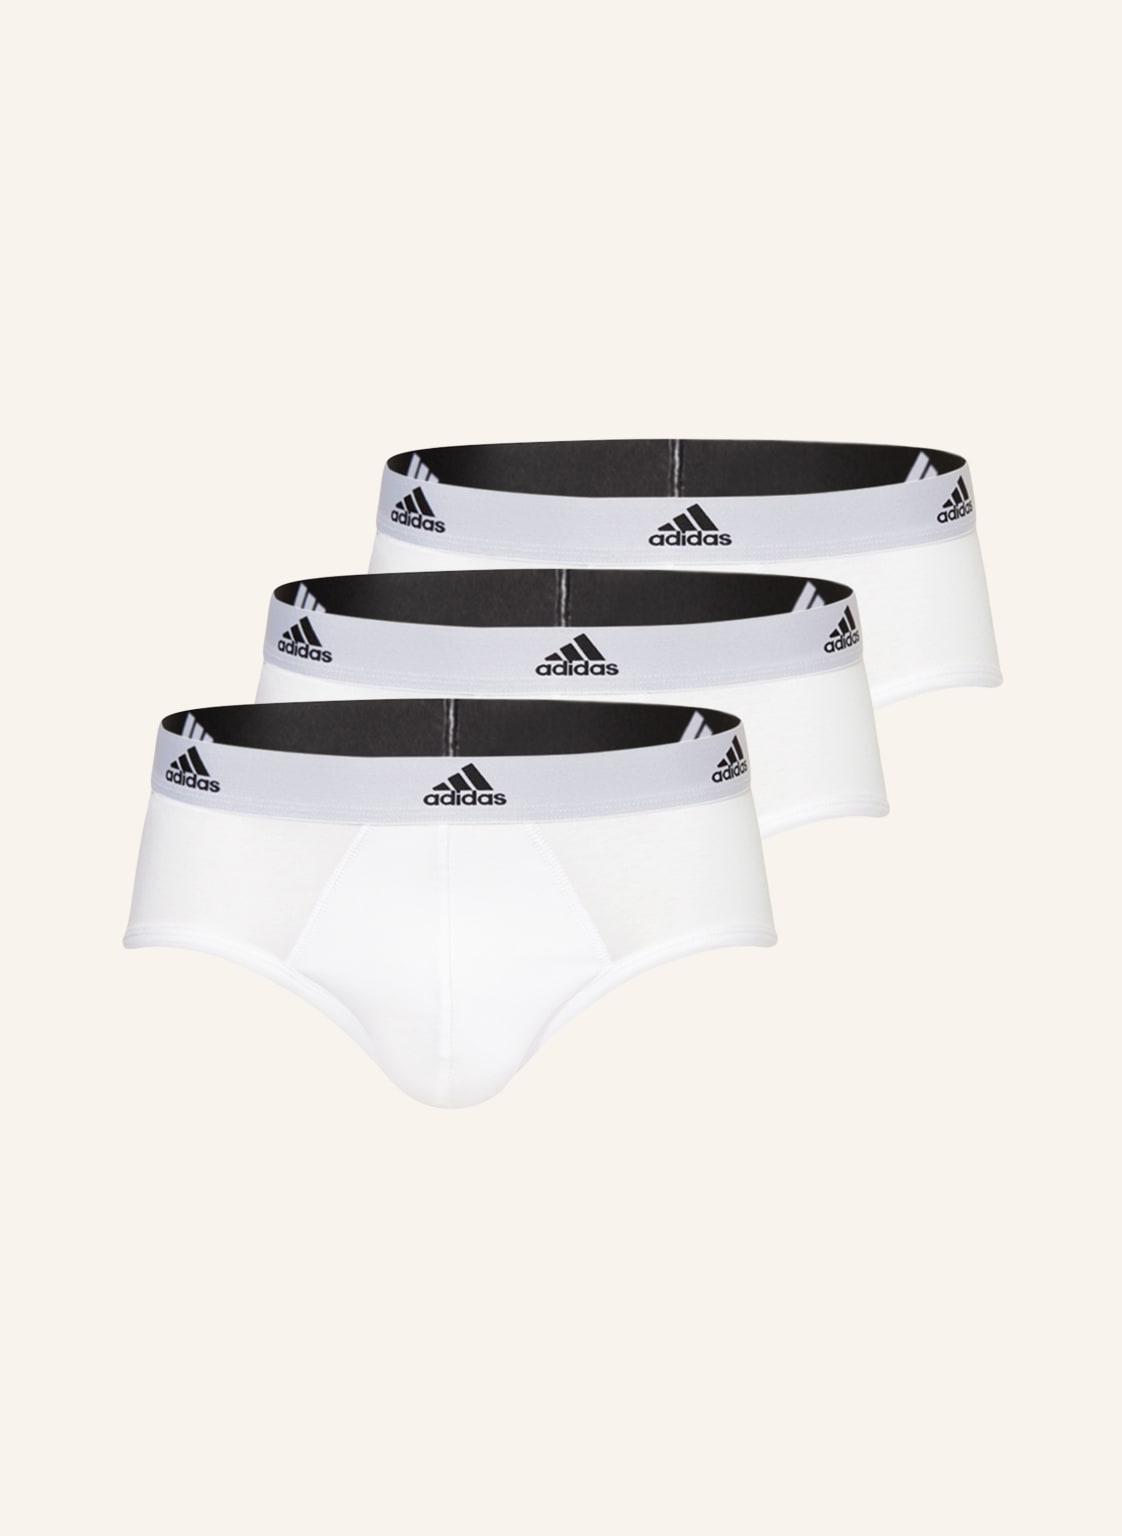 Image of Adidas 3er-Pack Slips weiss